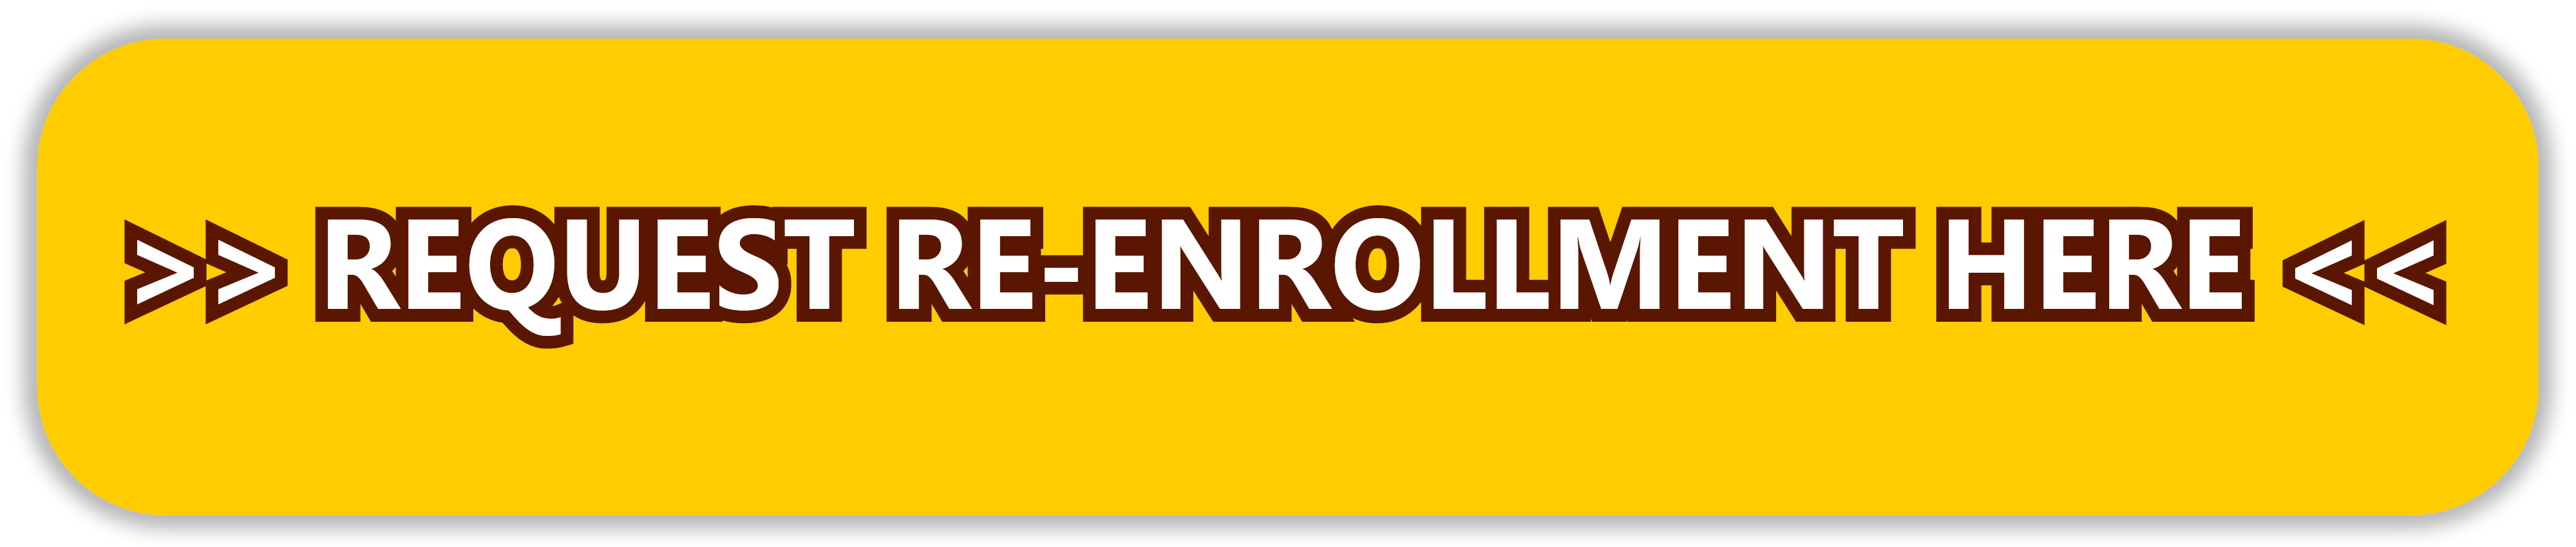 Request Re-Enrollment Here